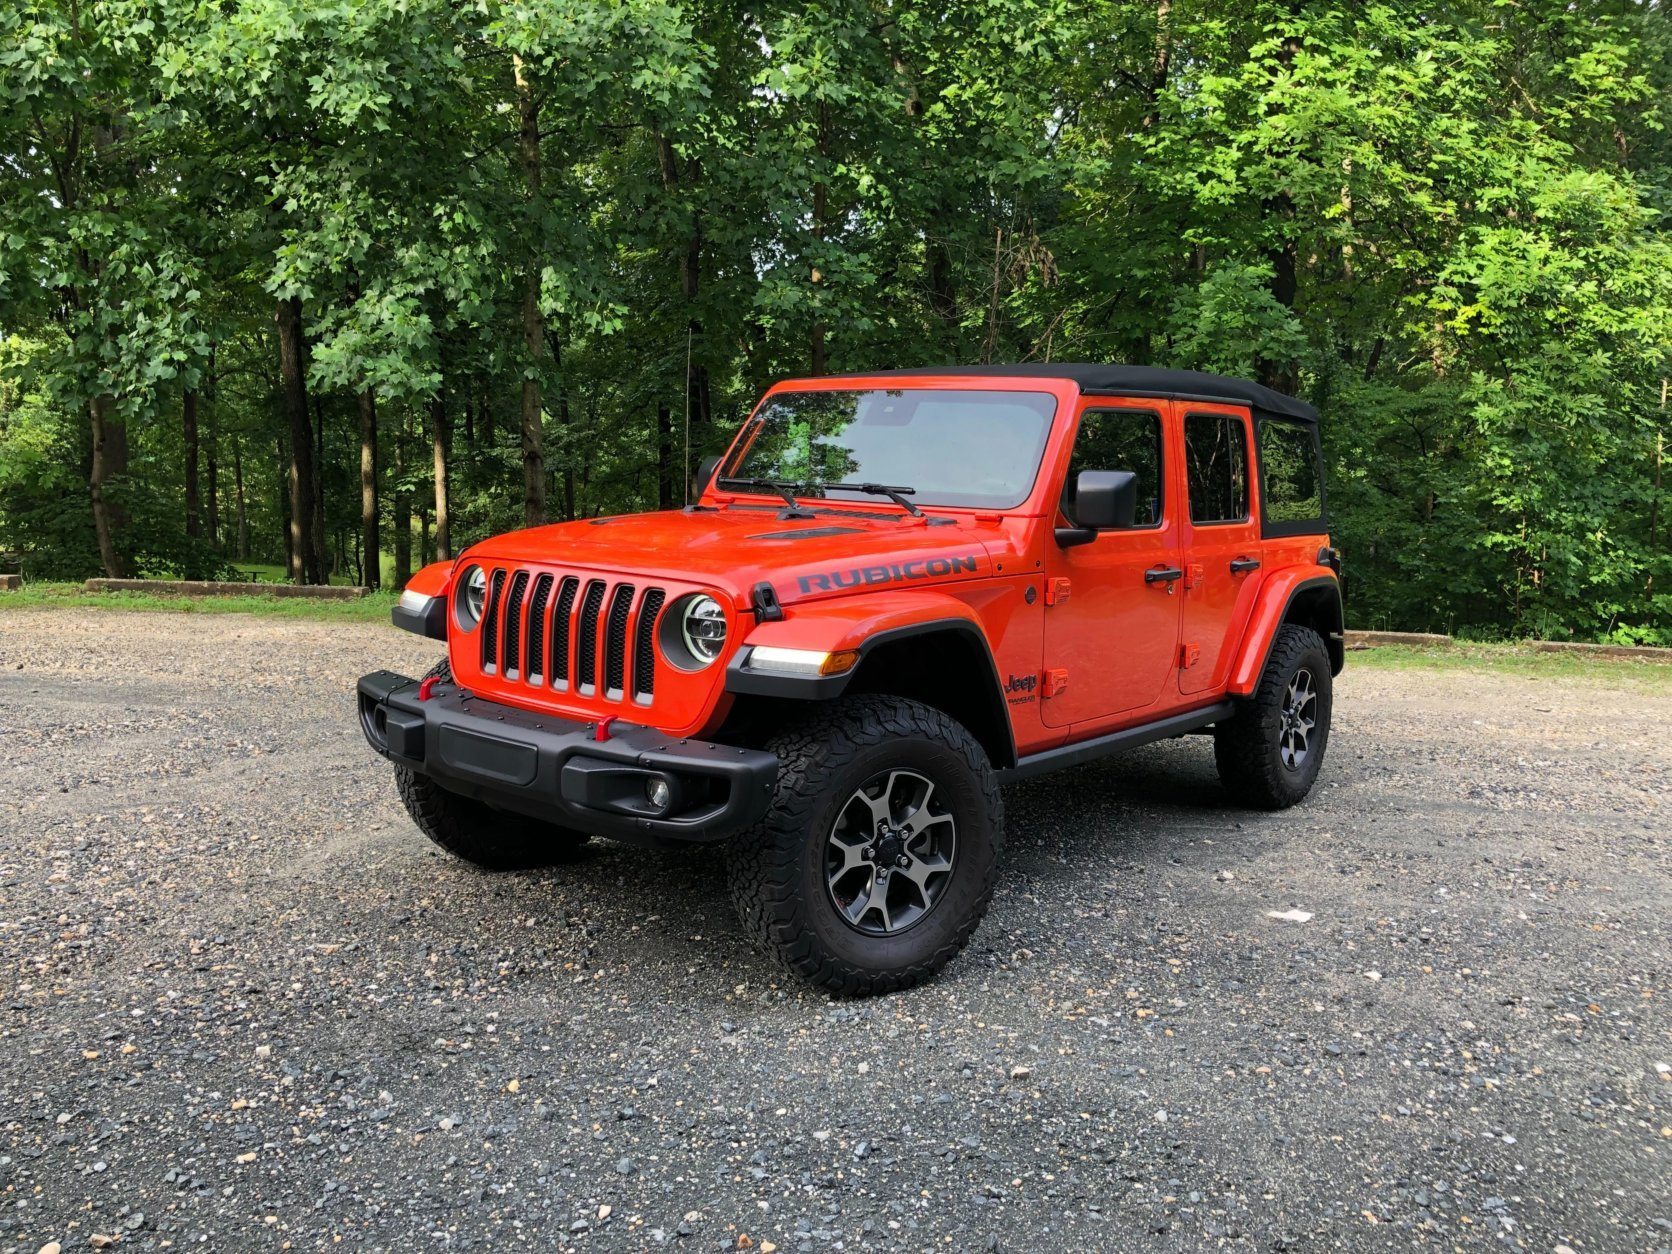 <p>The 2019 Wrangler Unlimited is easier to drive, too. No, it’s not hushed and whisper quiet on the highway but it&#8217;s manageable, even with the soft top down. I could carry on a conversation at normal levels on roads with 70 mph speed limits.</p>
<p>Another big change is a new turbo four-cylinder engine &#8212;  a $1,000 option &#8212; that works very well, but it can only be had with an 8-speed automatic which is an added $2,000. Luckily, a V6 and manual is standard but the four banger gives you a bit better fuel economy &#8212; about 22 mpg for my week and nearly 350 miles on a full tank.</p>
